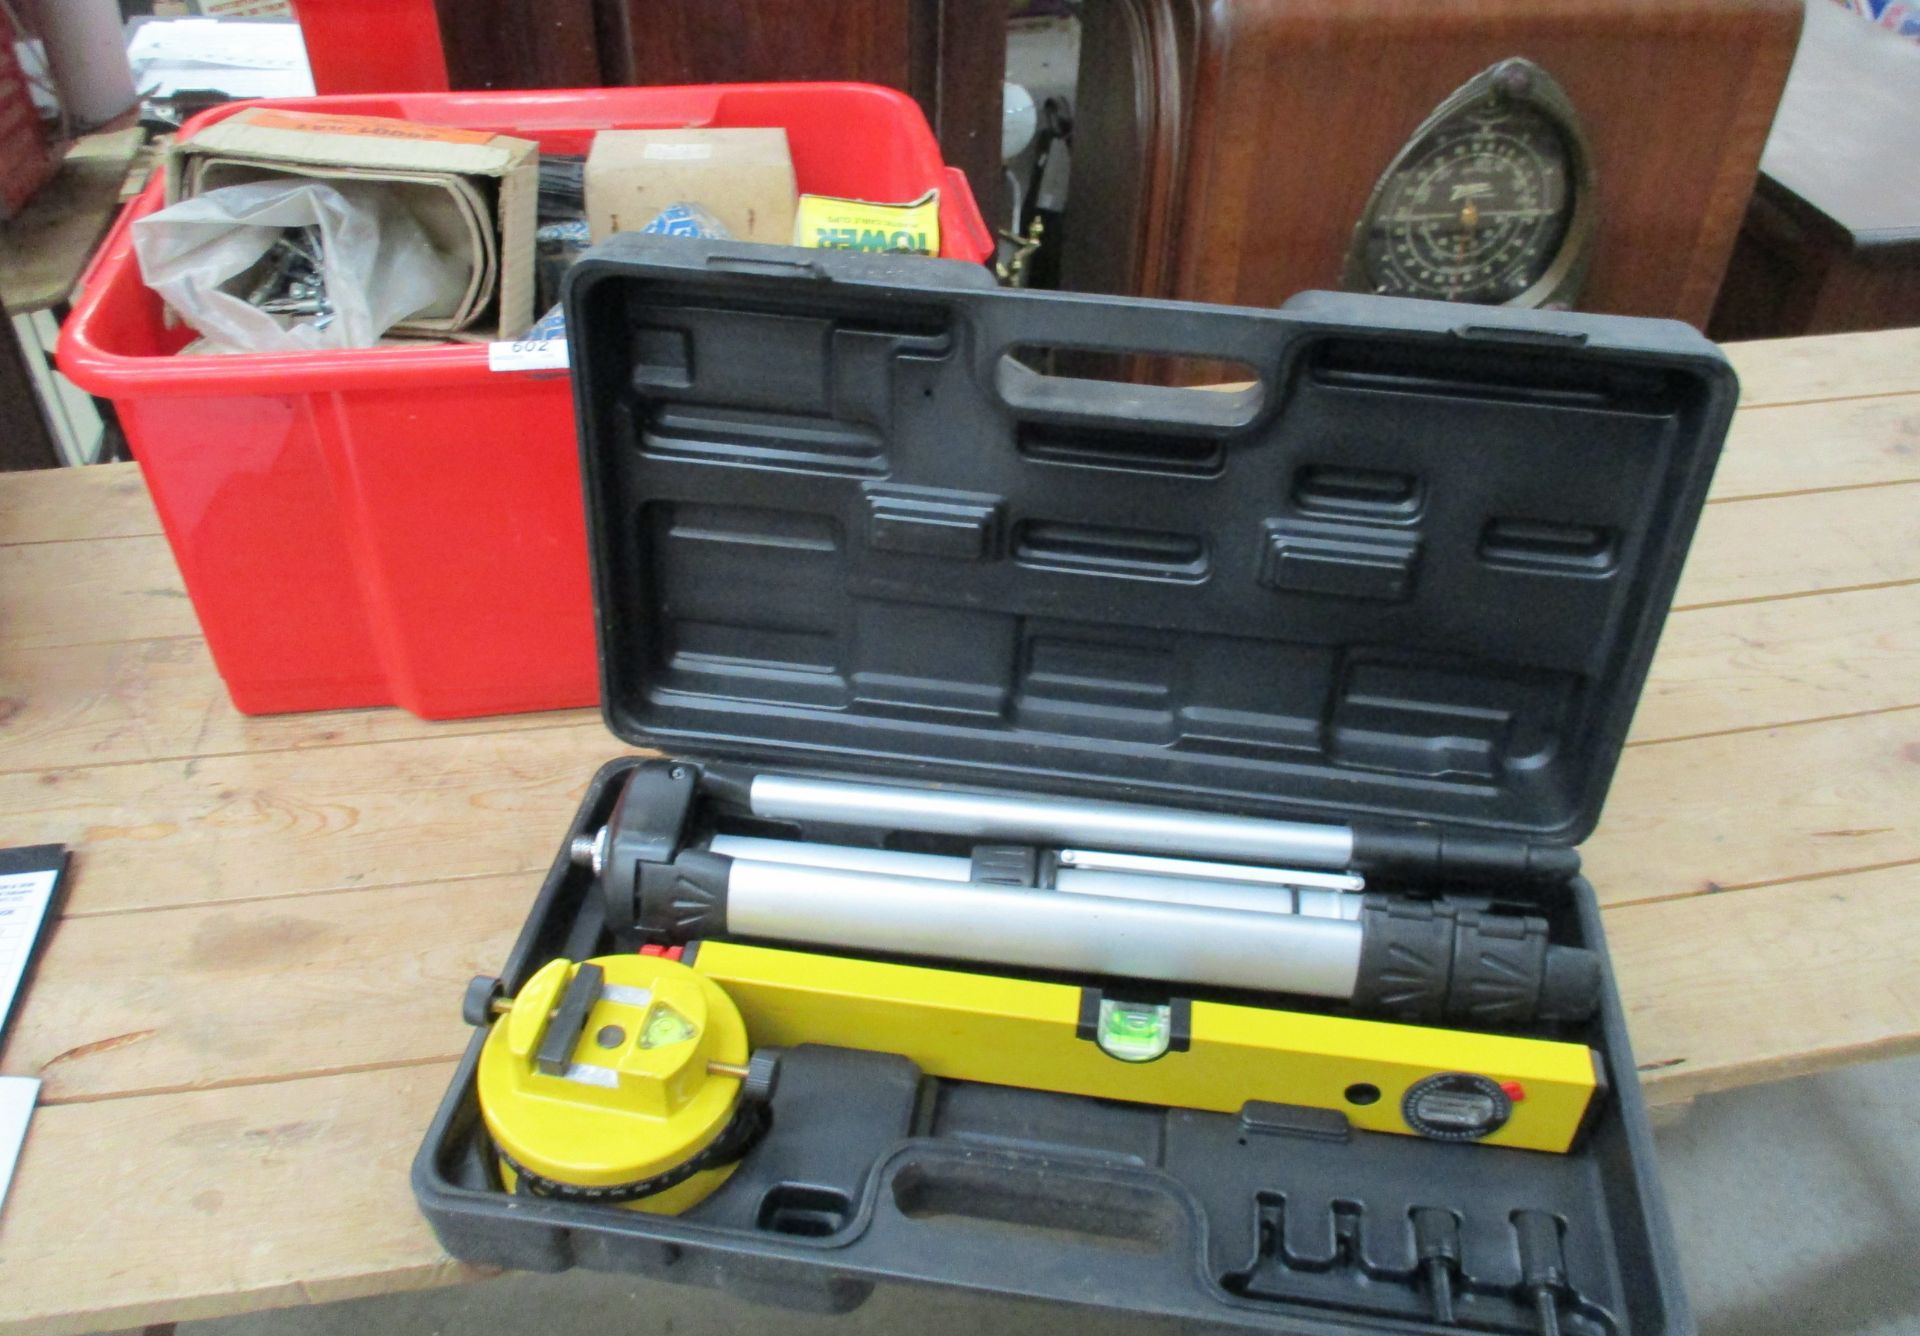 A Lasertool level tool kit - incomplete, and a box of wood screws,